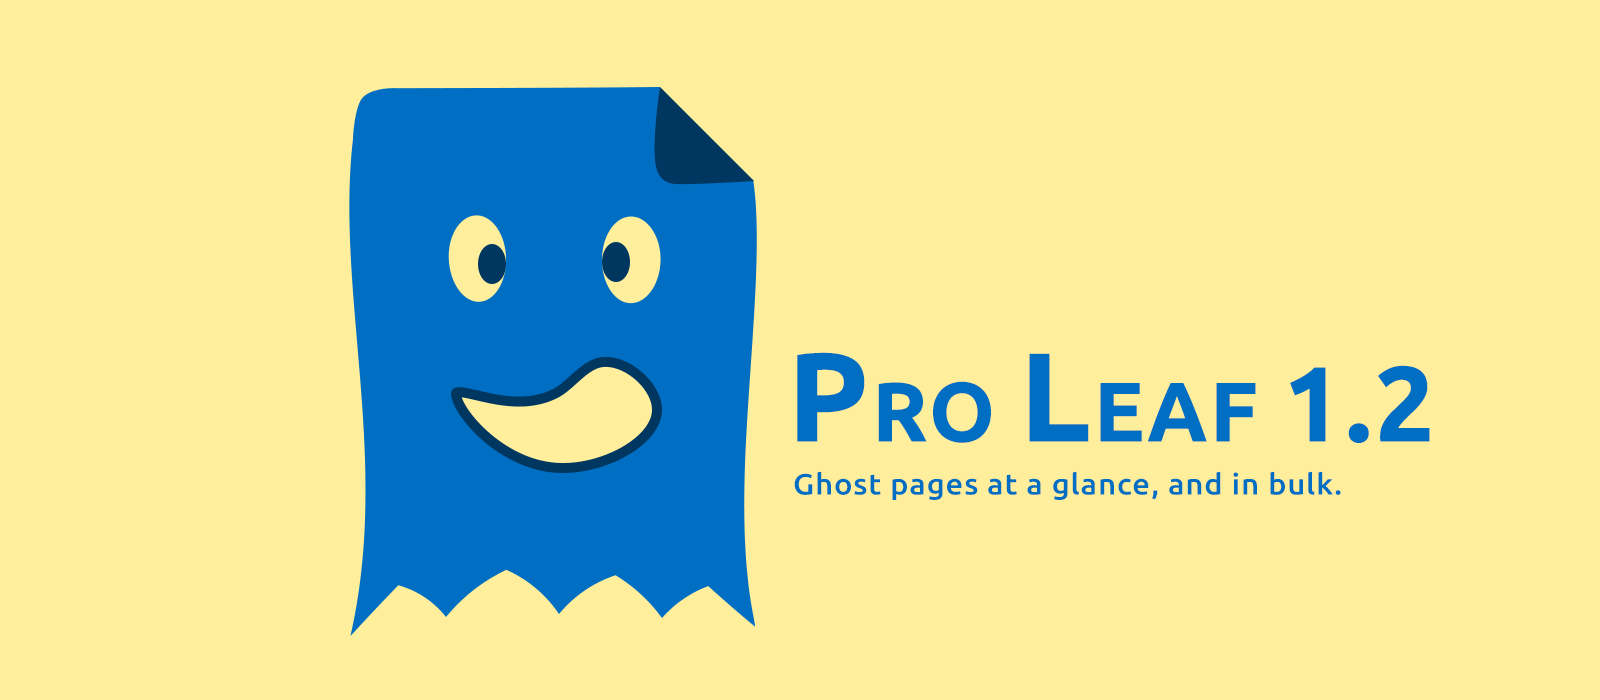 Pro Leaf 1.2: Ghost Pages at a Glance, and in Bulk